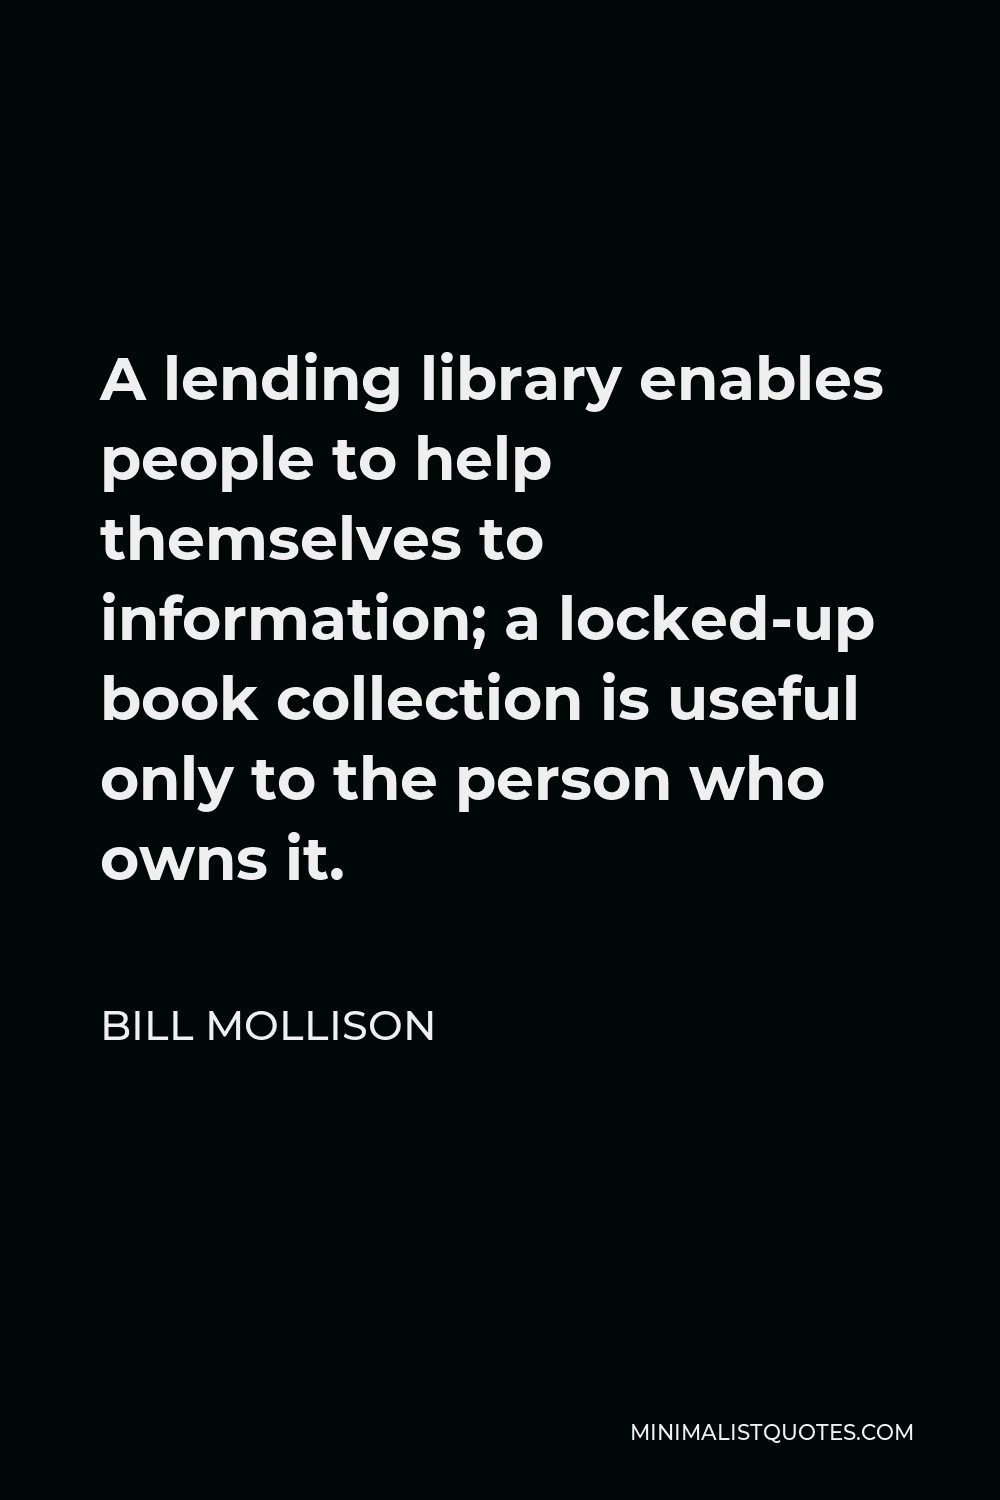 Bill Mollison Quote - A lending library enables people to help themselves to information; a locked-up book collection is useful only to the person who owns it.